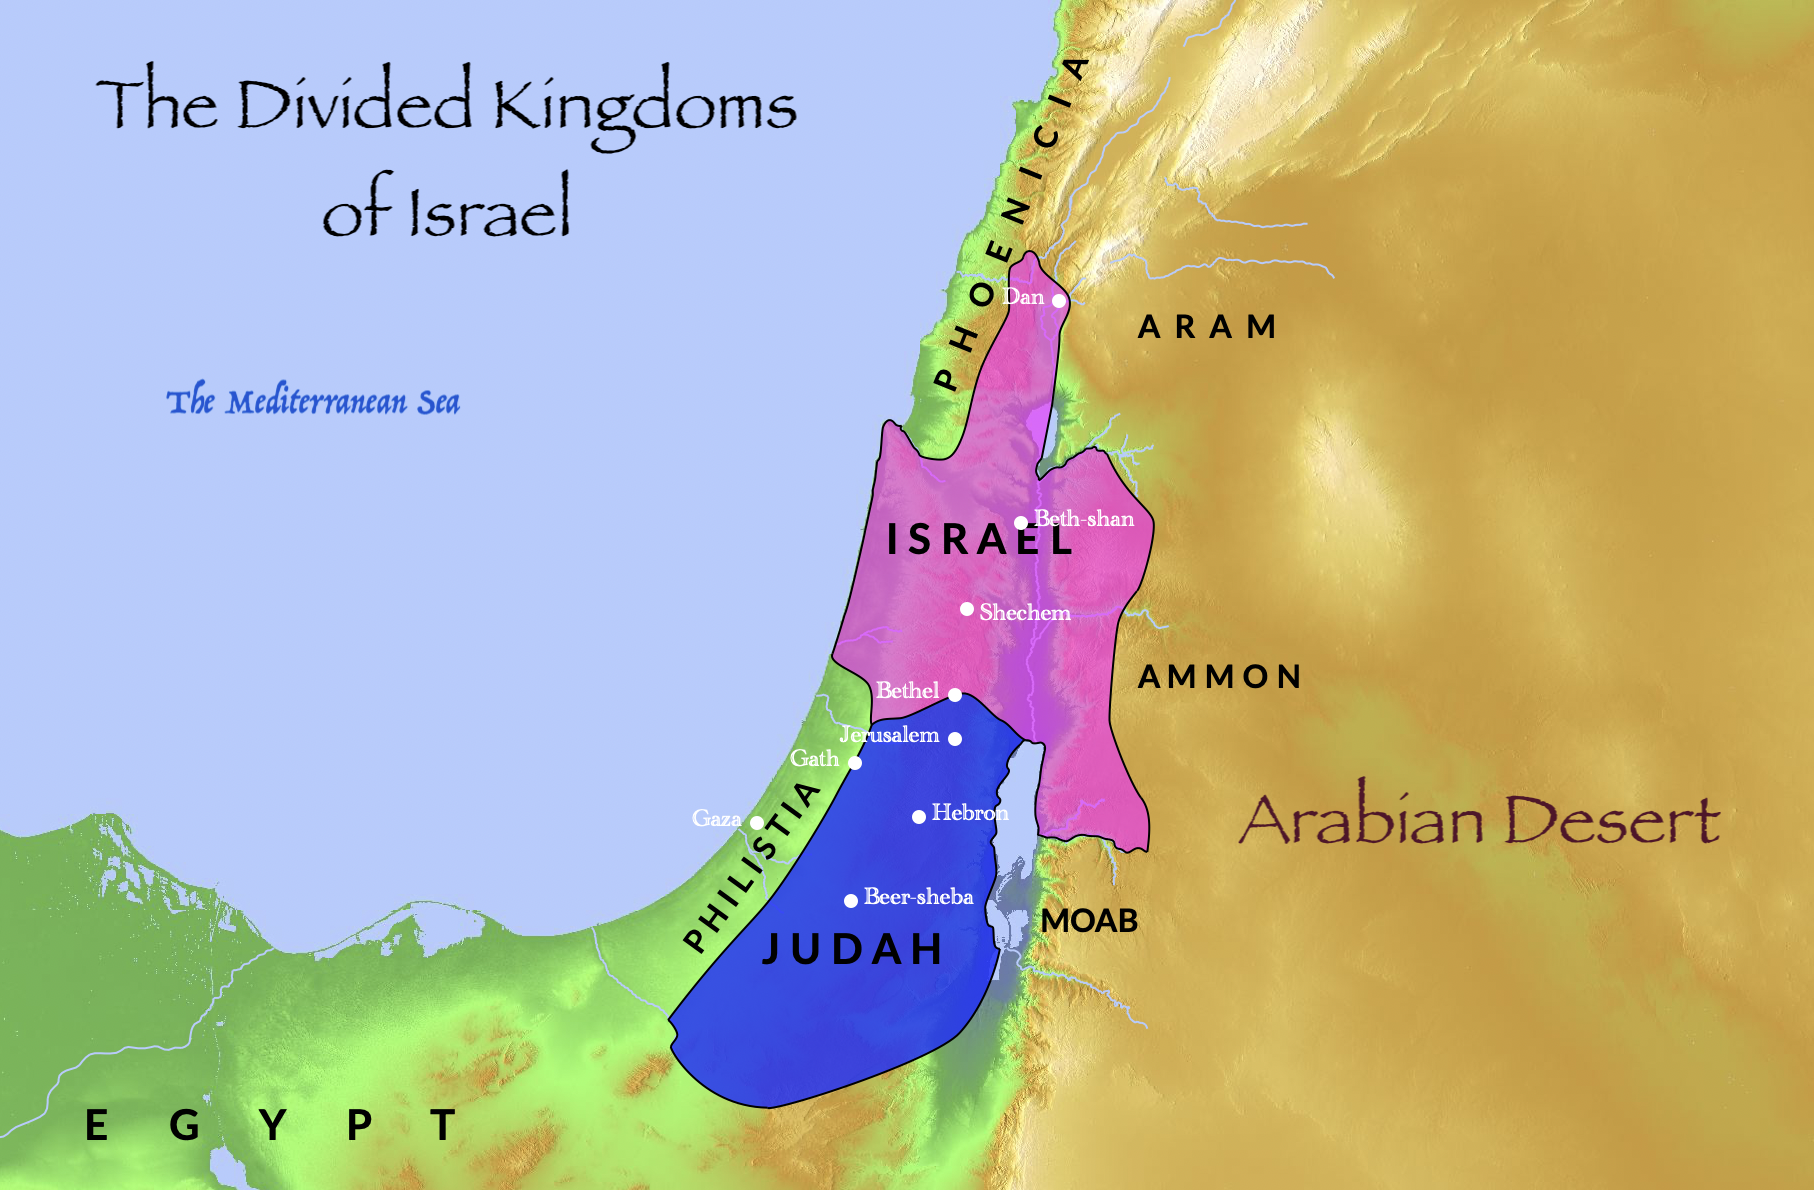 The Divided Kingdom of Israel with Israel as the Northern Kingdom and Judah as the Southern Kingdom.